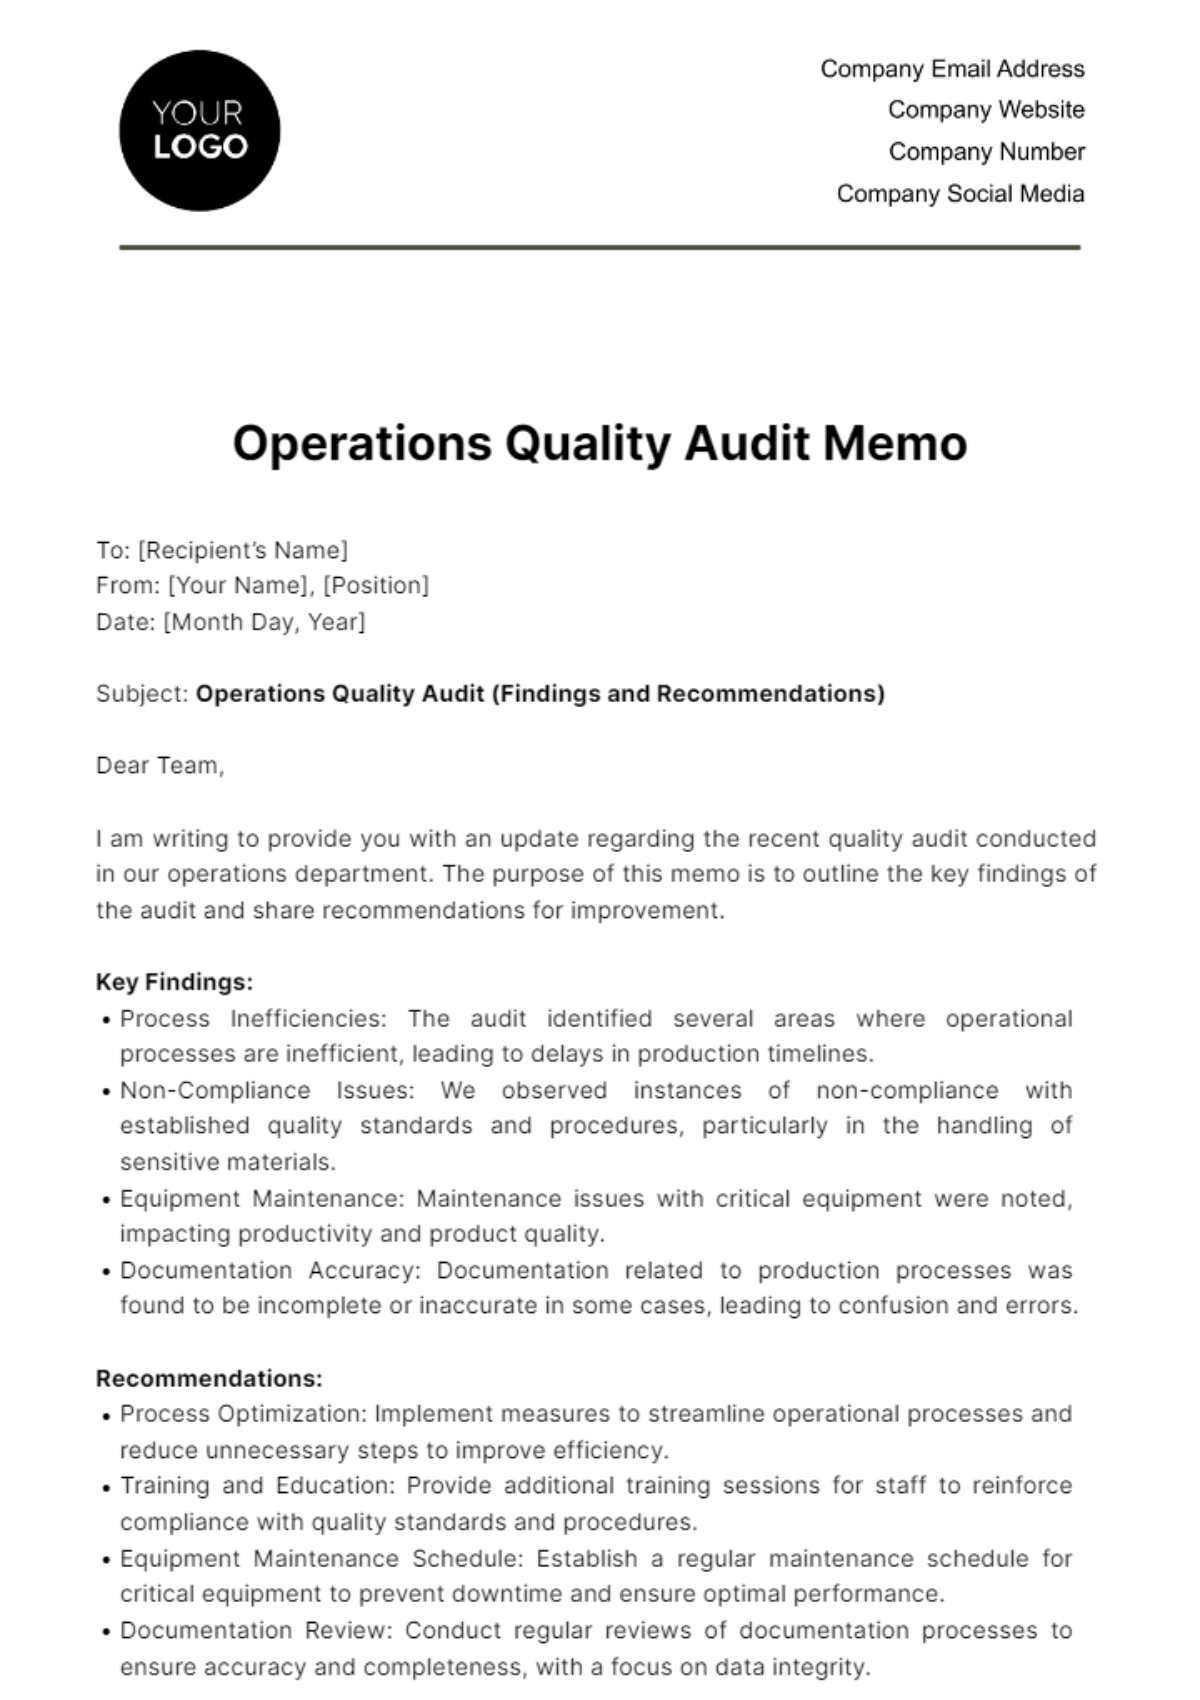 Operations Quality Audit Memo Template